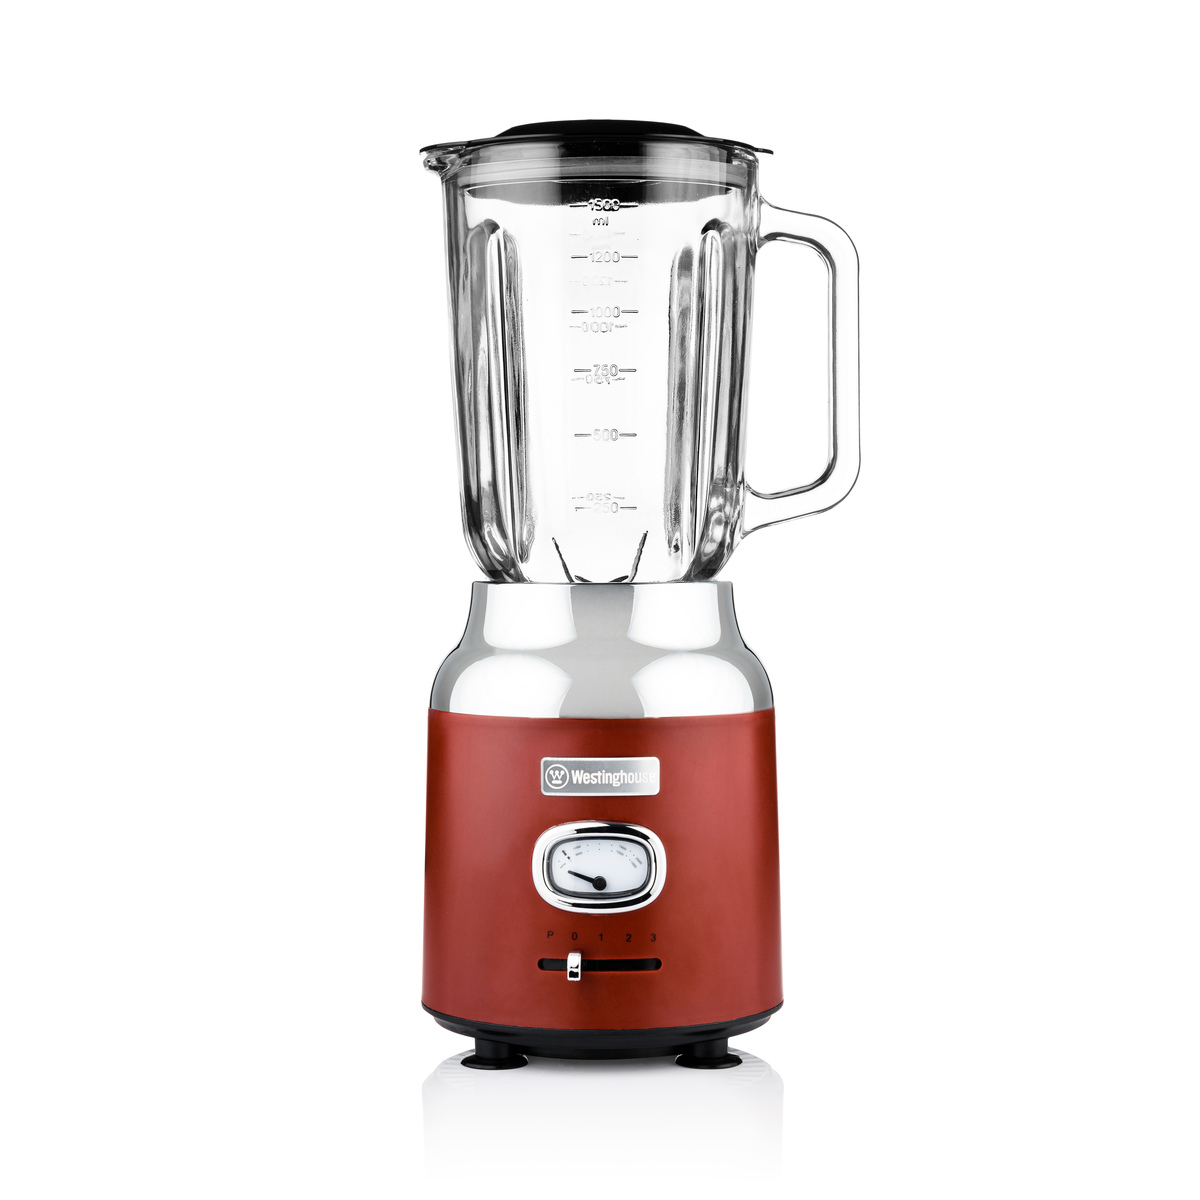 Blender Pedestal Iwotto Red New CLEARANCE - Spain, New - The